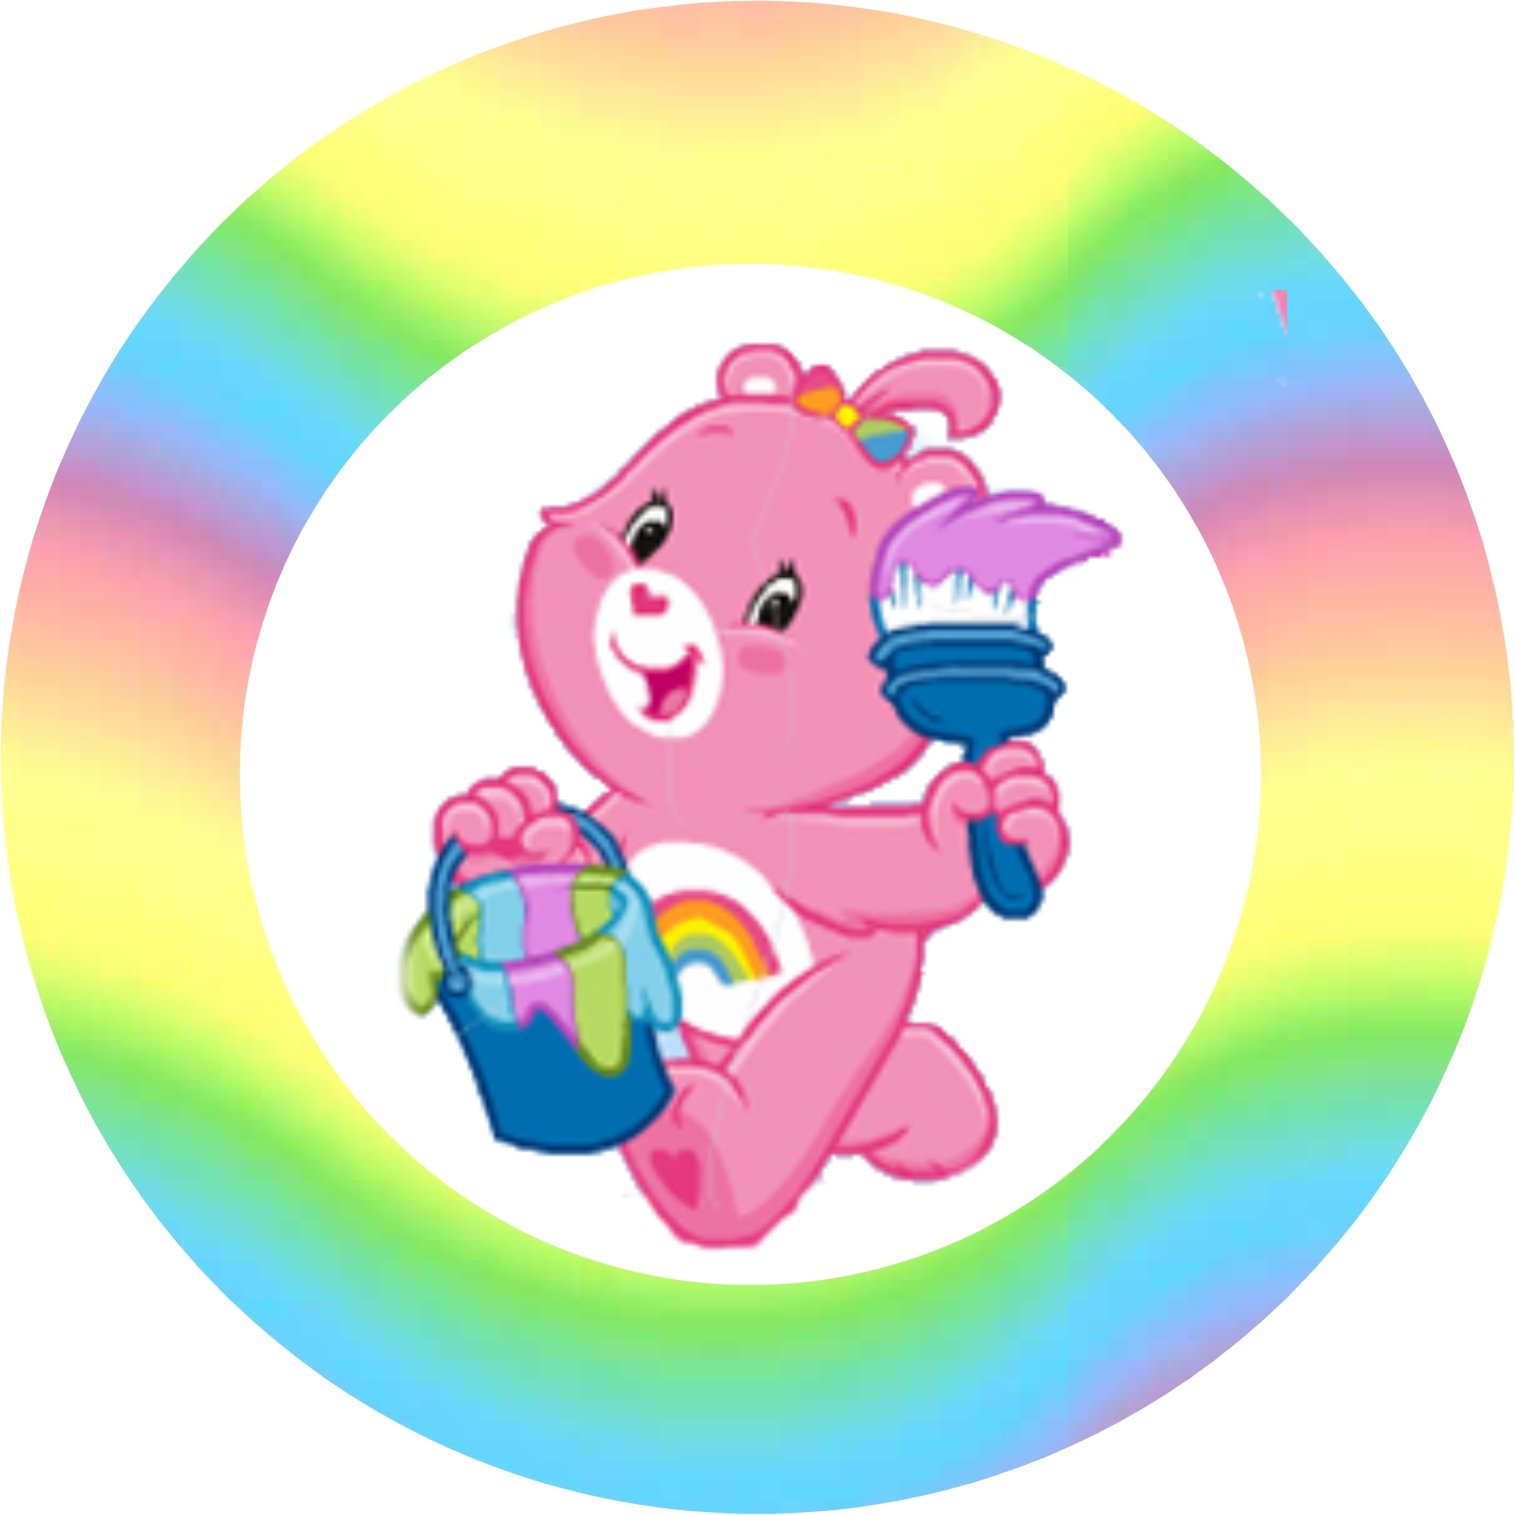 care-bears-party-free-printable-cupcake-wrappers-and-toppers-oh